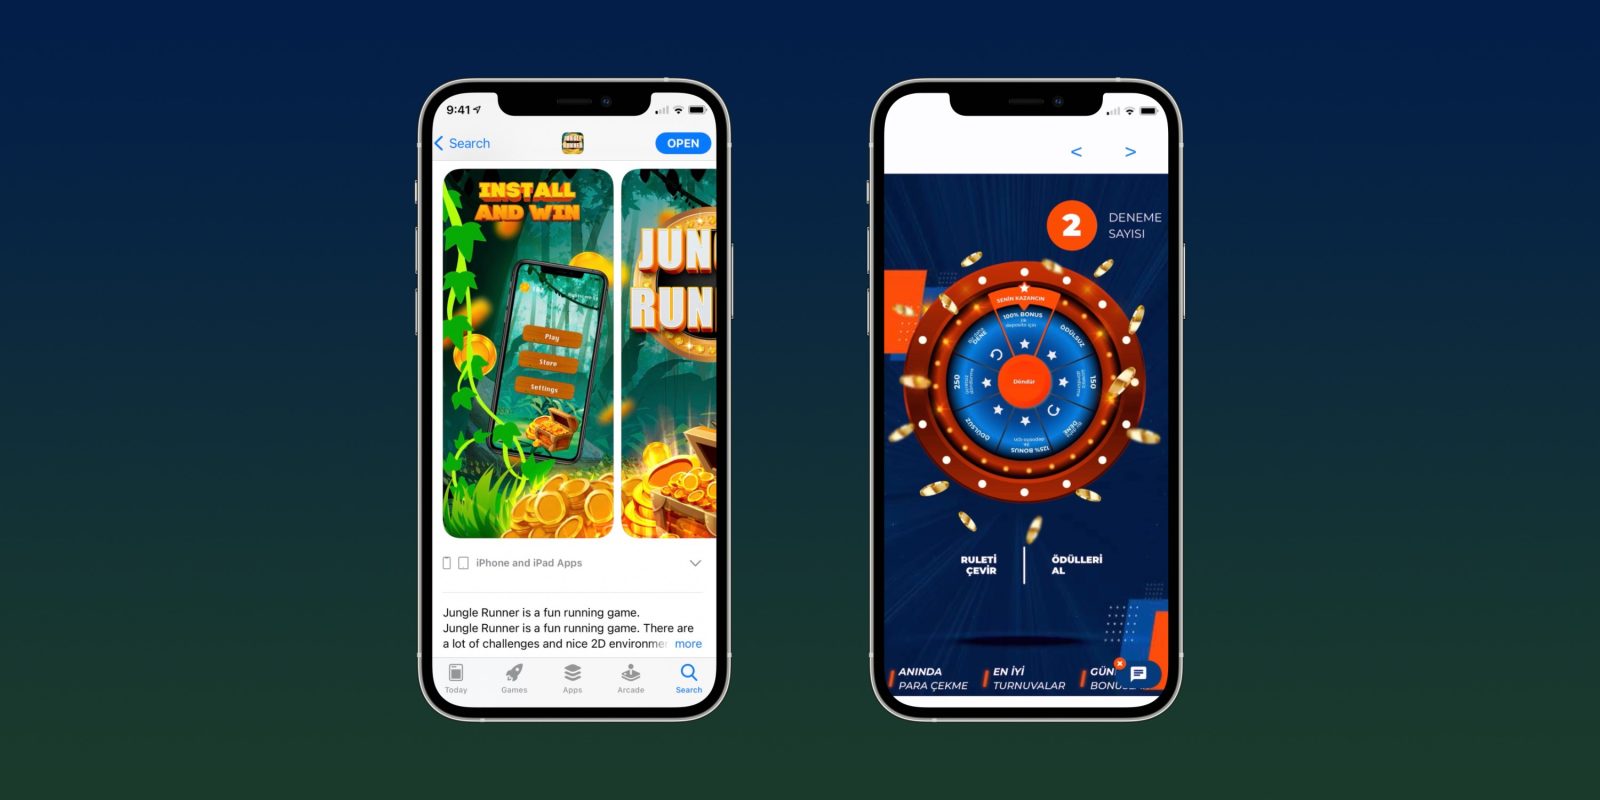 Juwa on iPhone: Experience the Ultimate Power of Connectivity